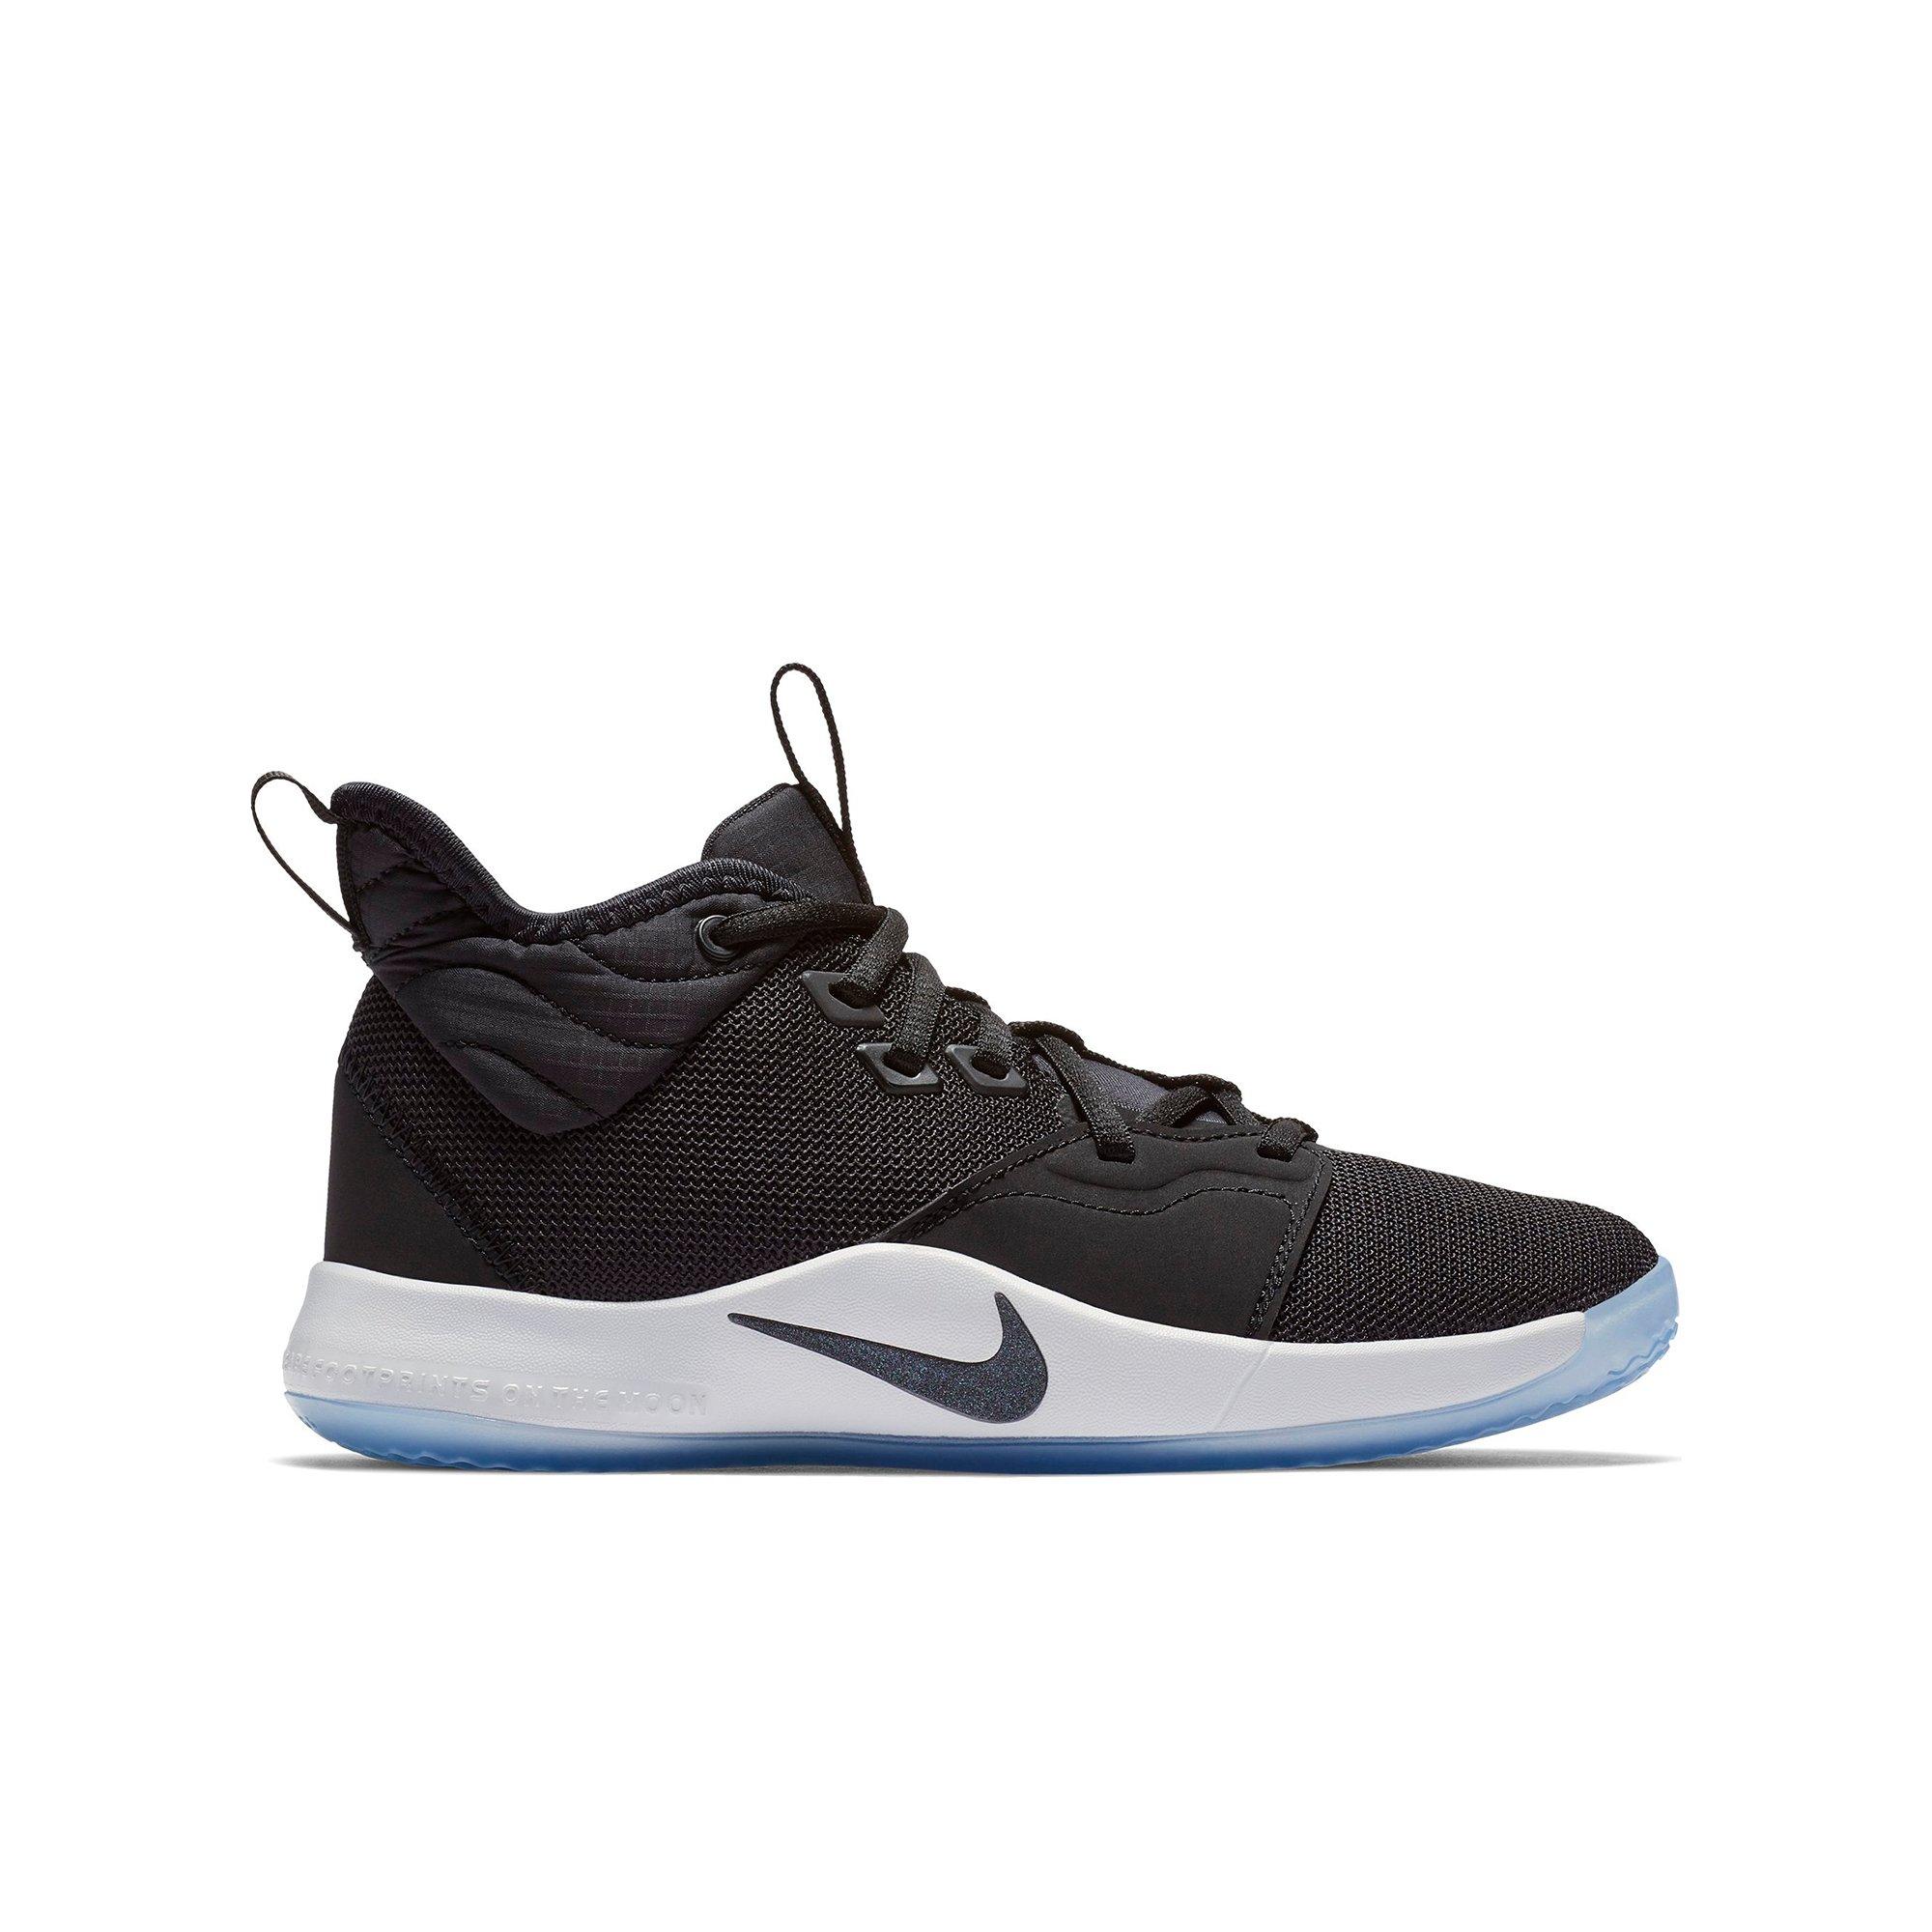 Paul George Shoes | Basketball Shoes 